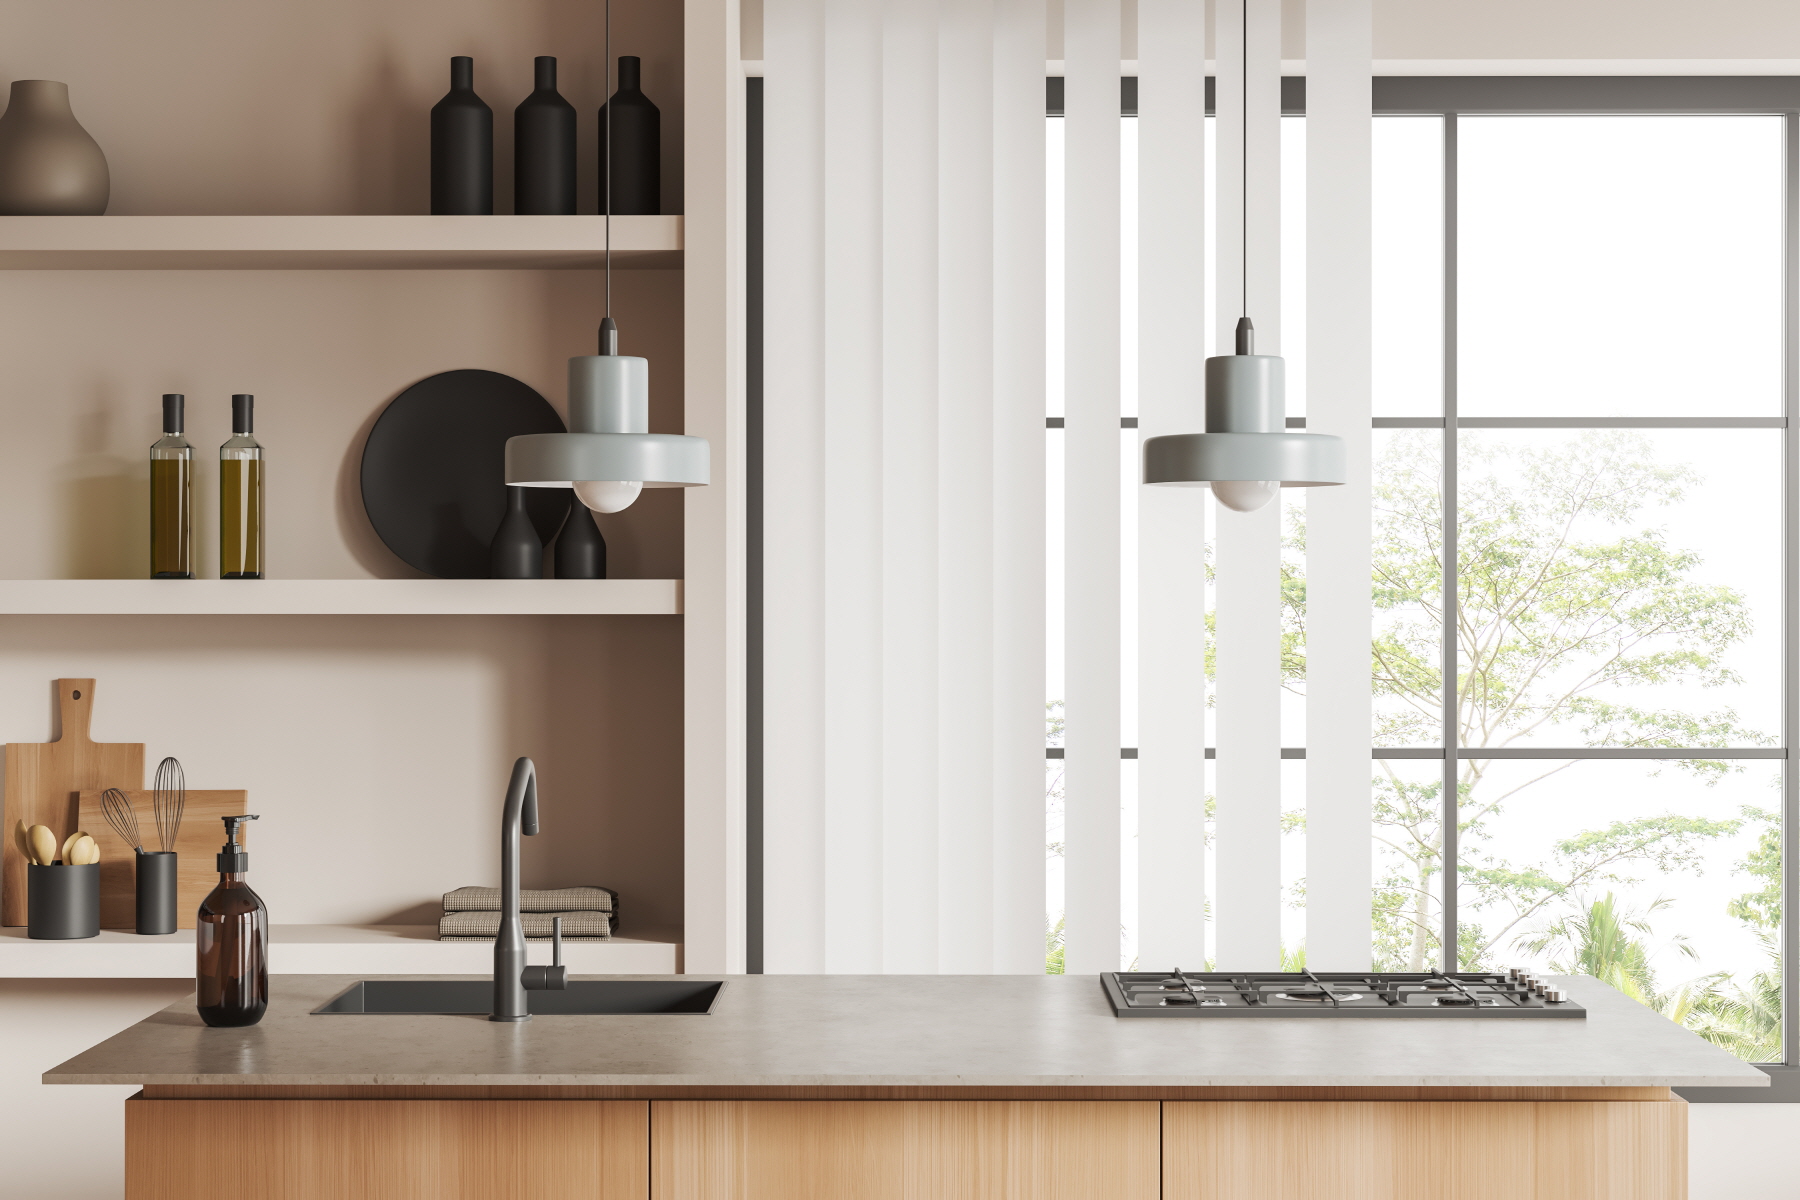 LX Hausys surfaces pair seamlessly with minimalist hardware, enhancing kitchen style with sophistication.